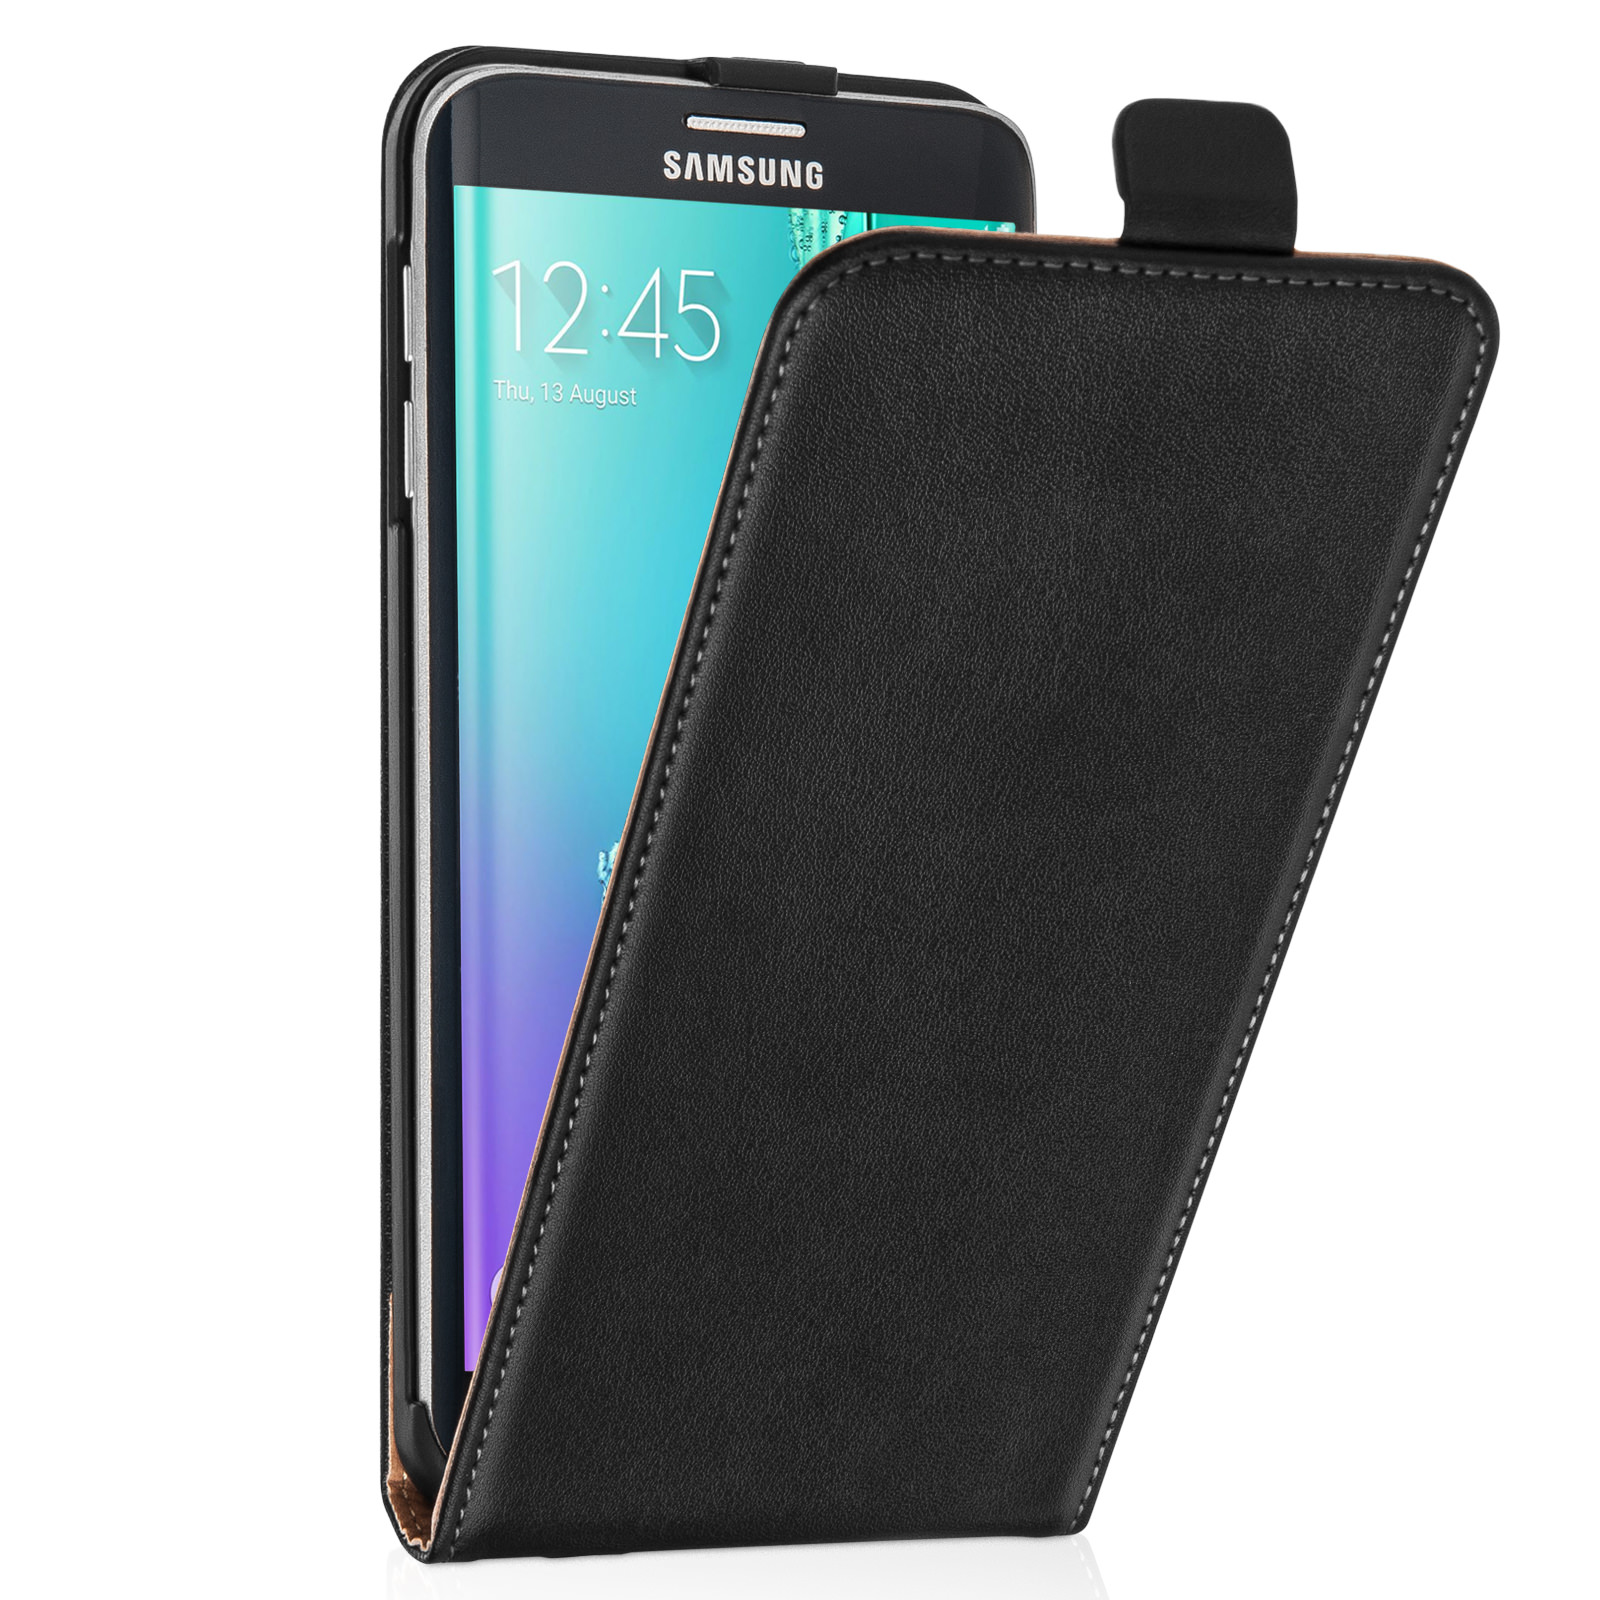 Yousave Accessories Samsung Galaxy S6 Edge Plus Real Leather Flip Case - Black 